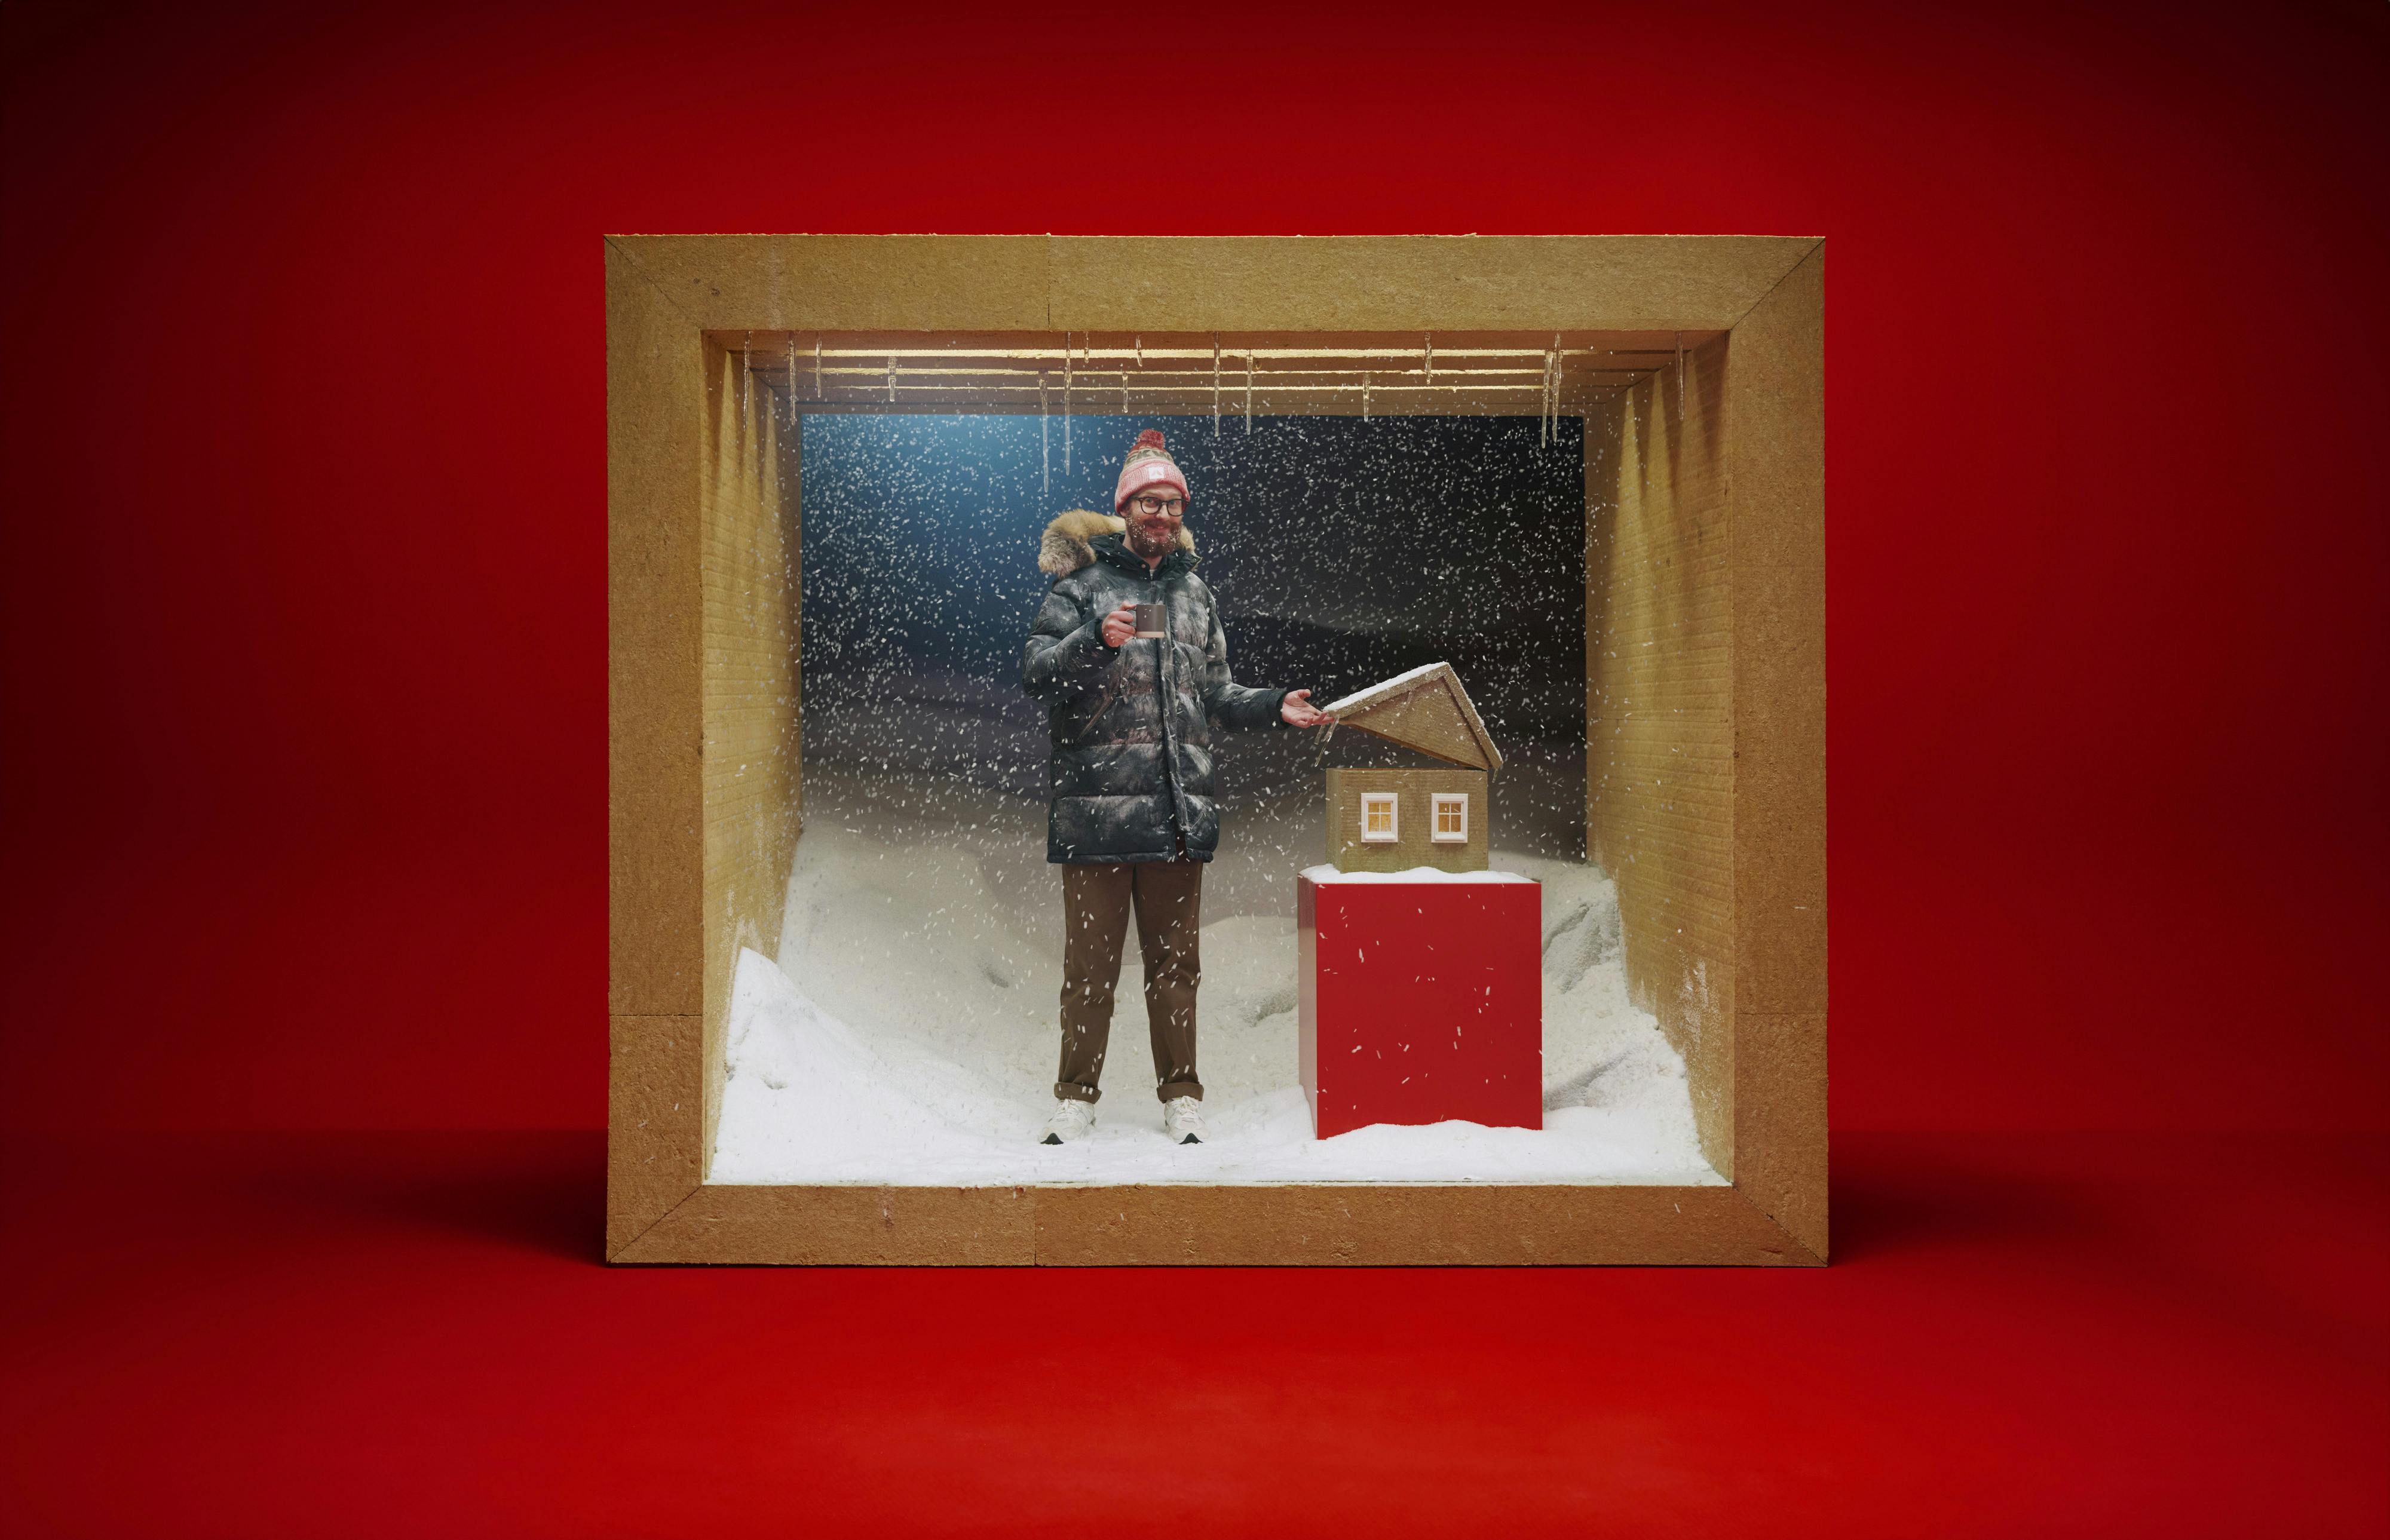 ROCKWOOL insulation is engineered to keep you comfortable inside whatever the weather is outside.

